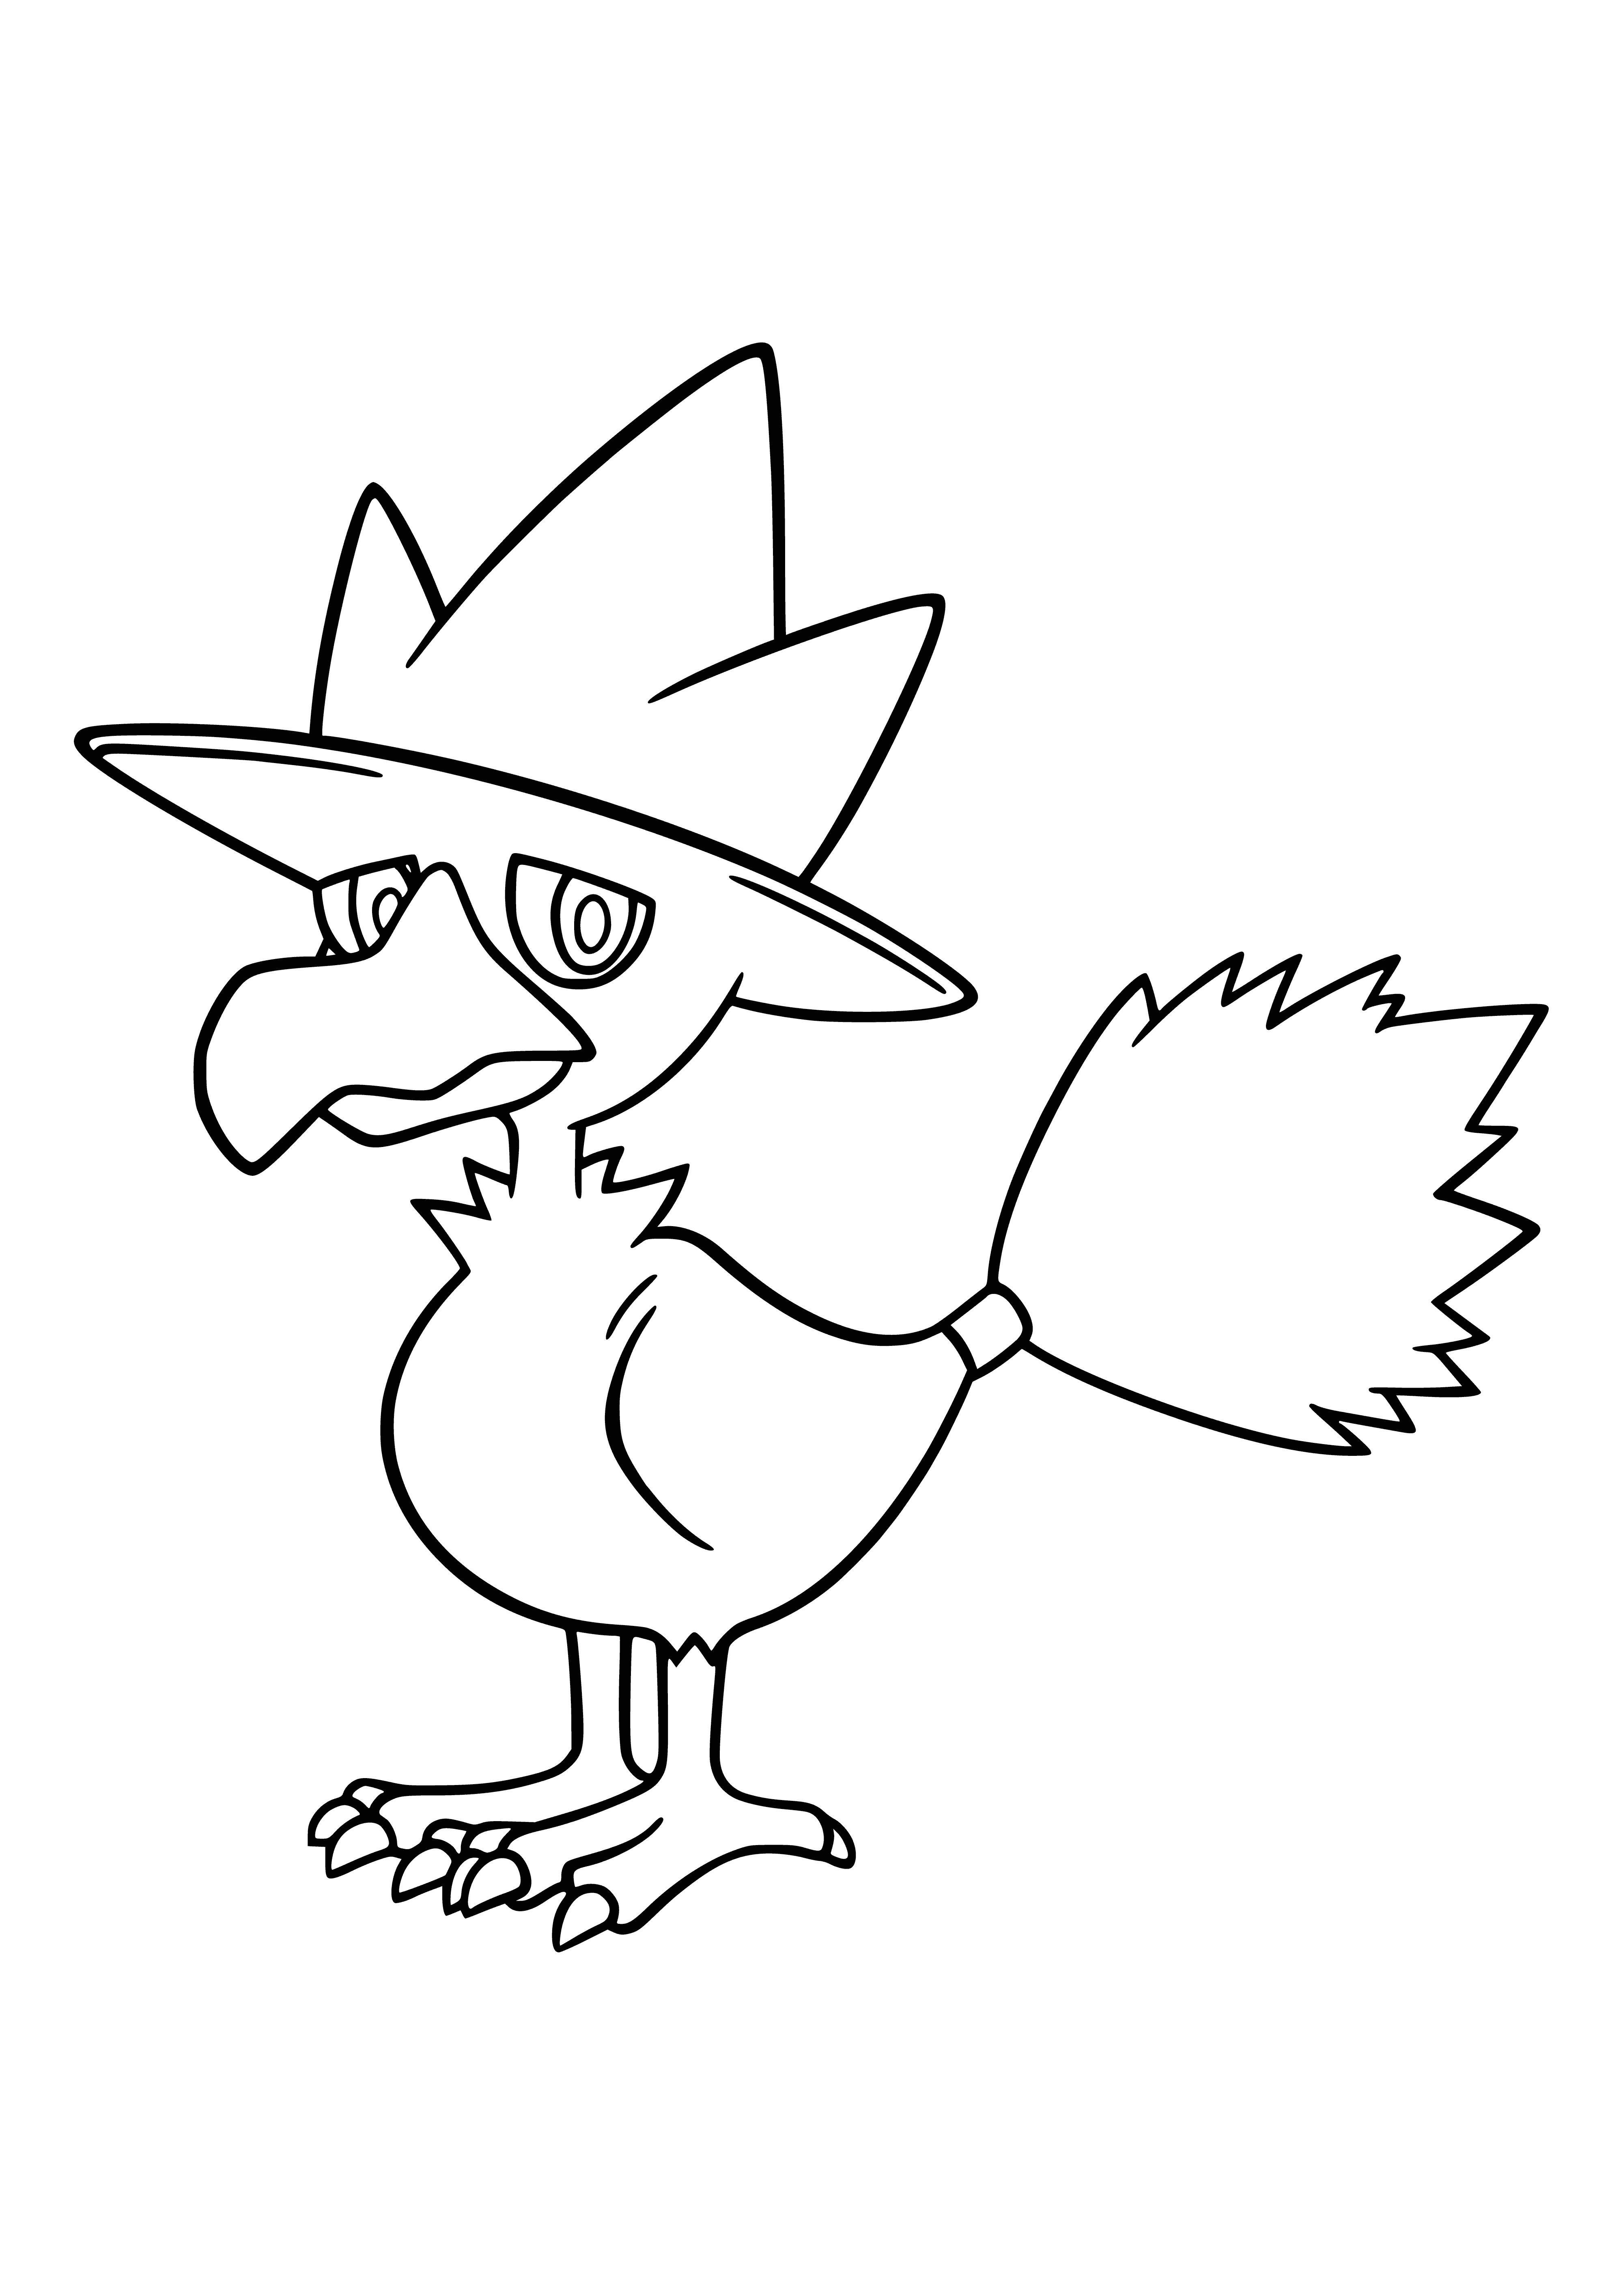 Pokemon Markrow (Murkrow) coloring page